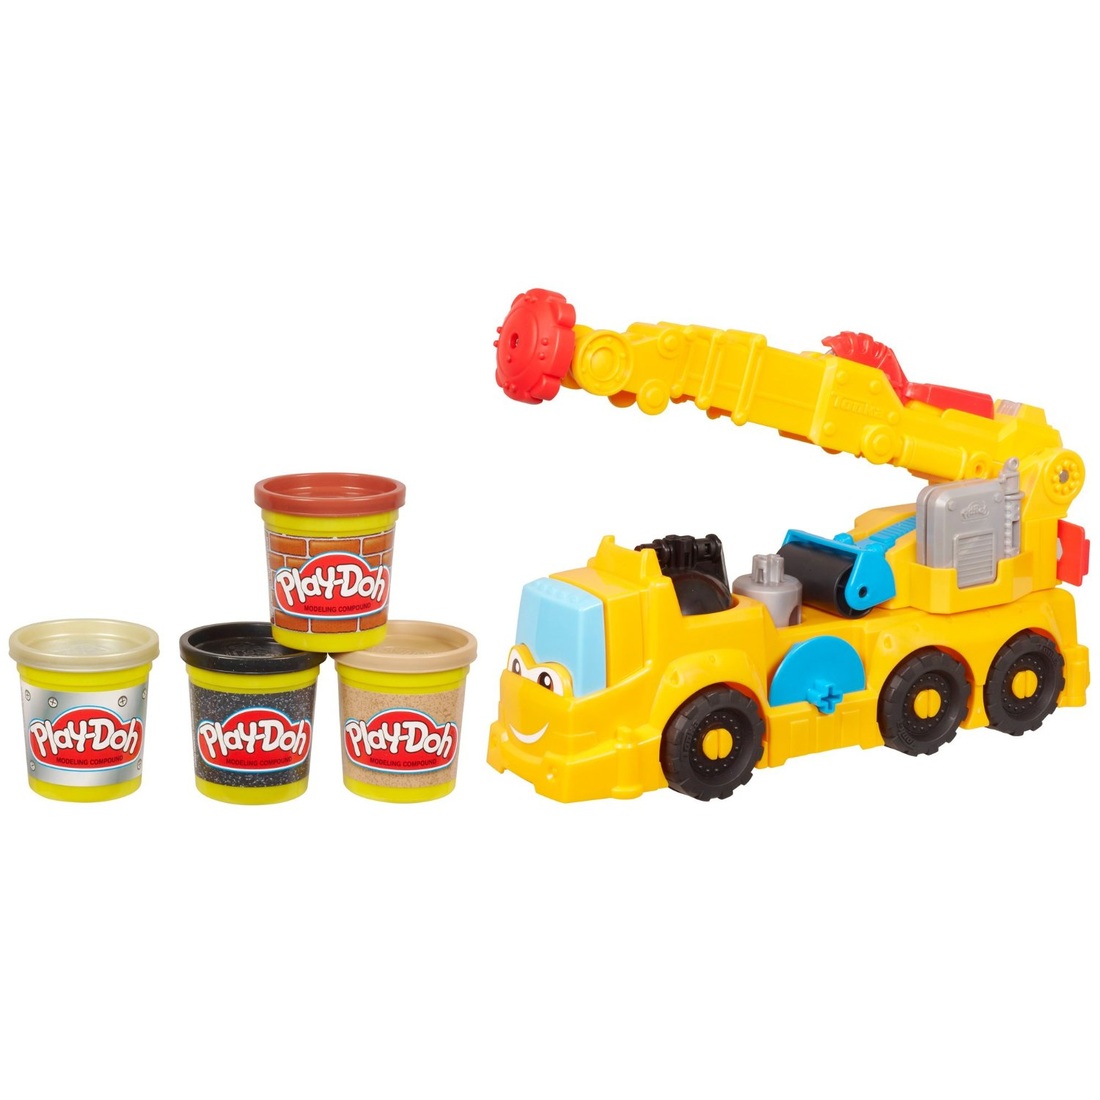 TOP TOYS FOR 4 YEAR OLDS